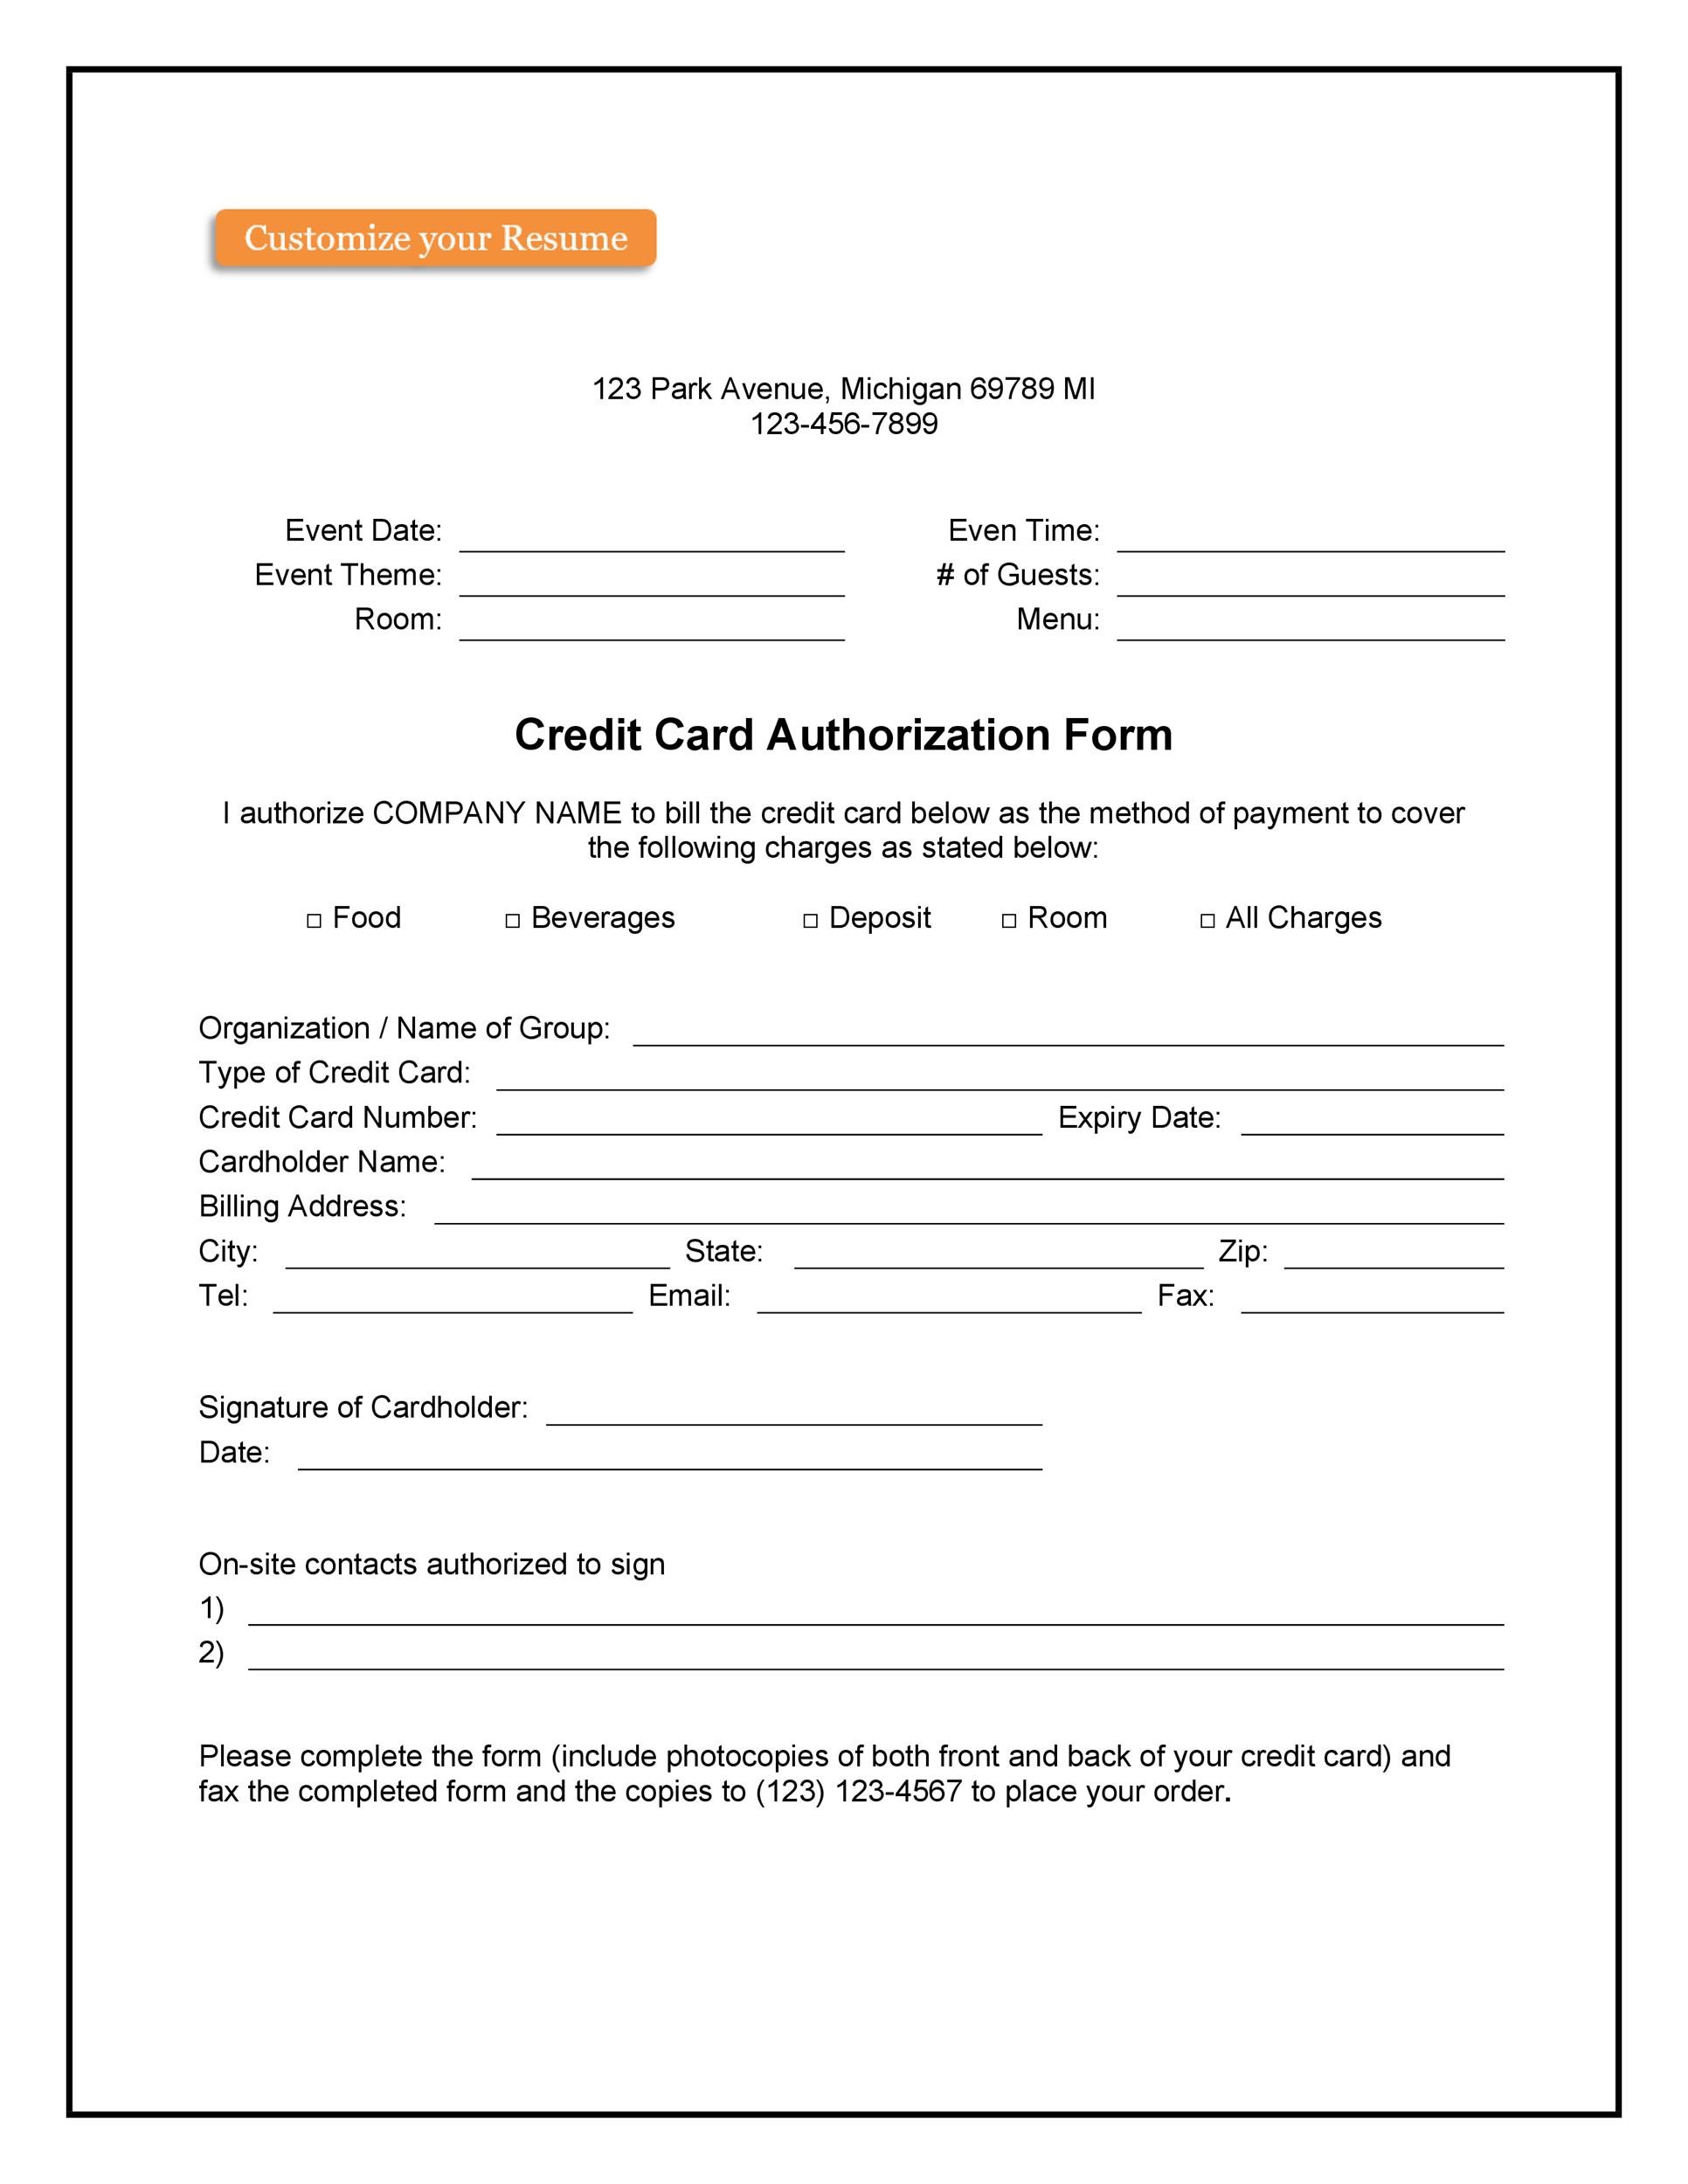 41 Credit Card Authorization Forms Templates Ready To Use 3452